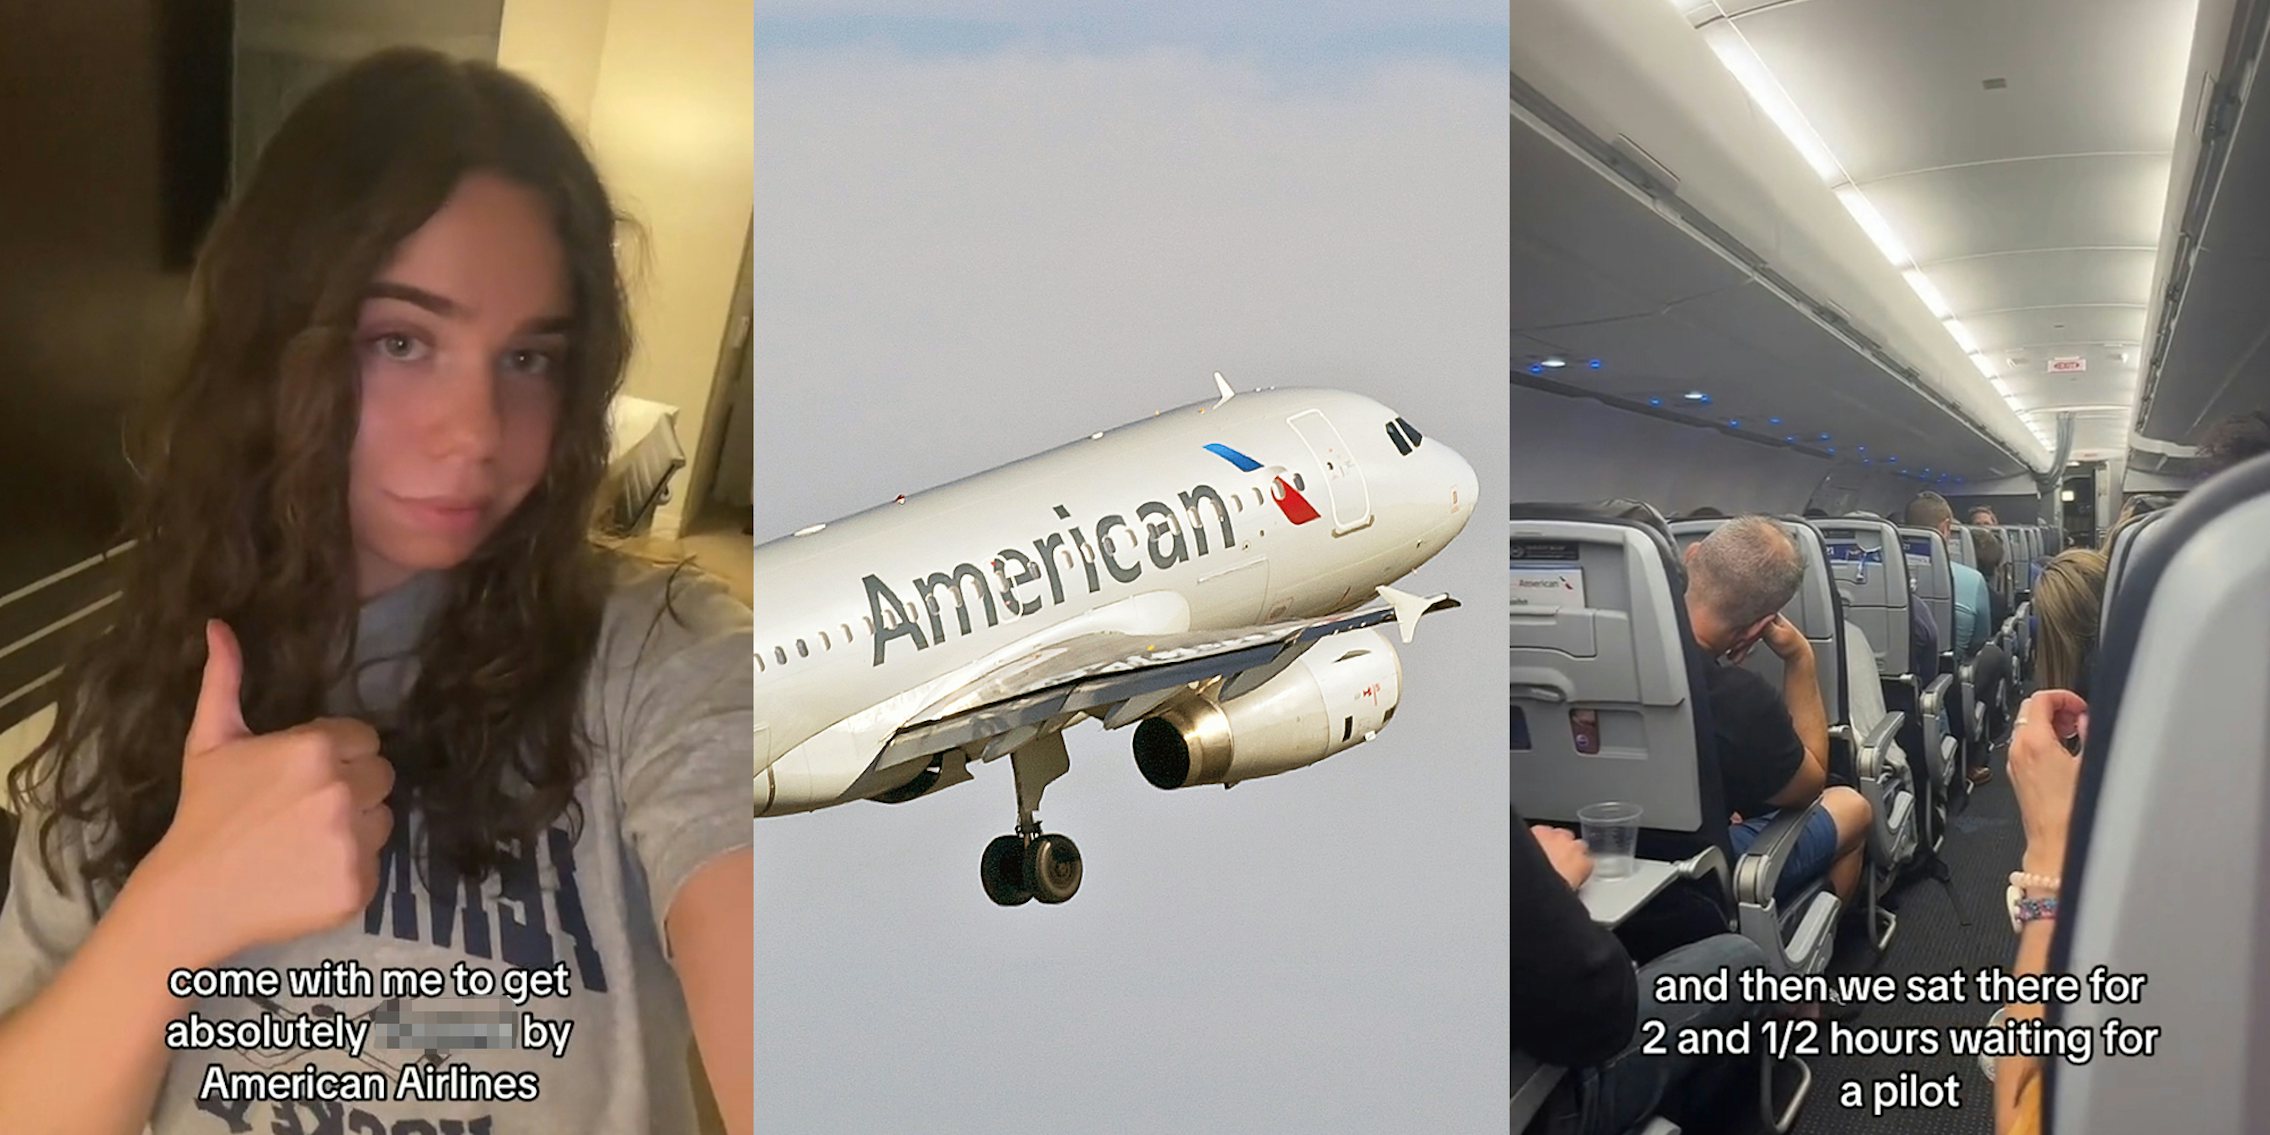 American Airlines passenger delayed 15 hours. She says airline didn’t cover her $200 hotel room